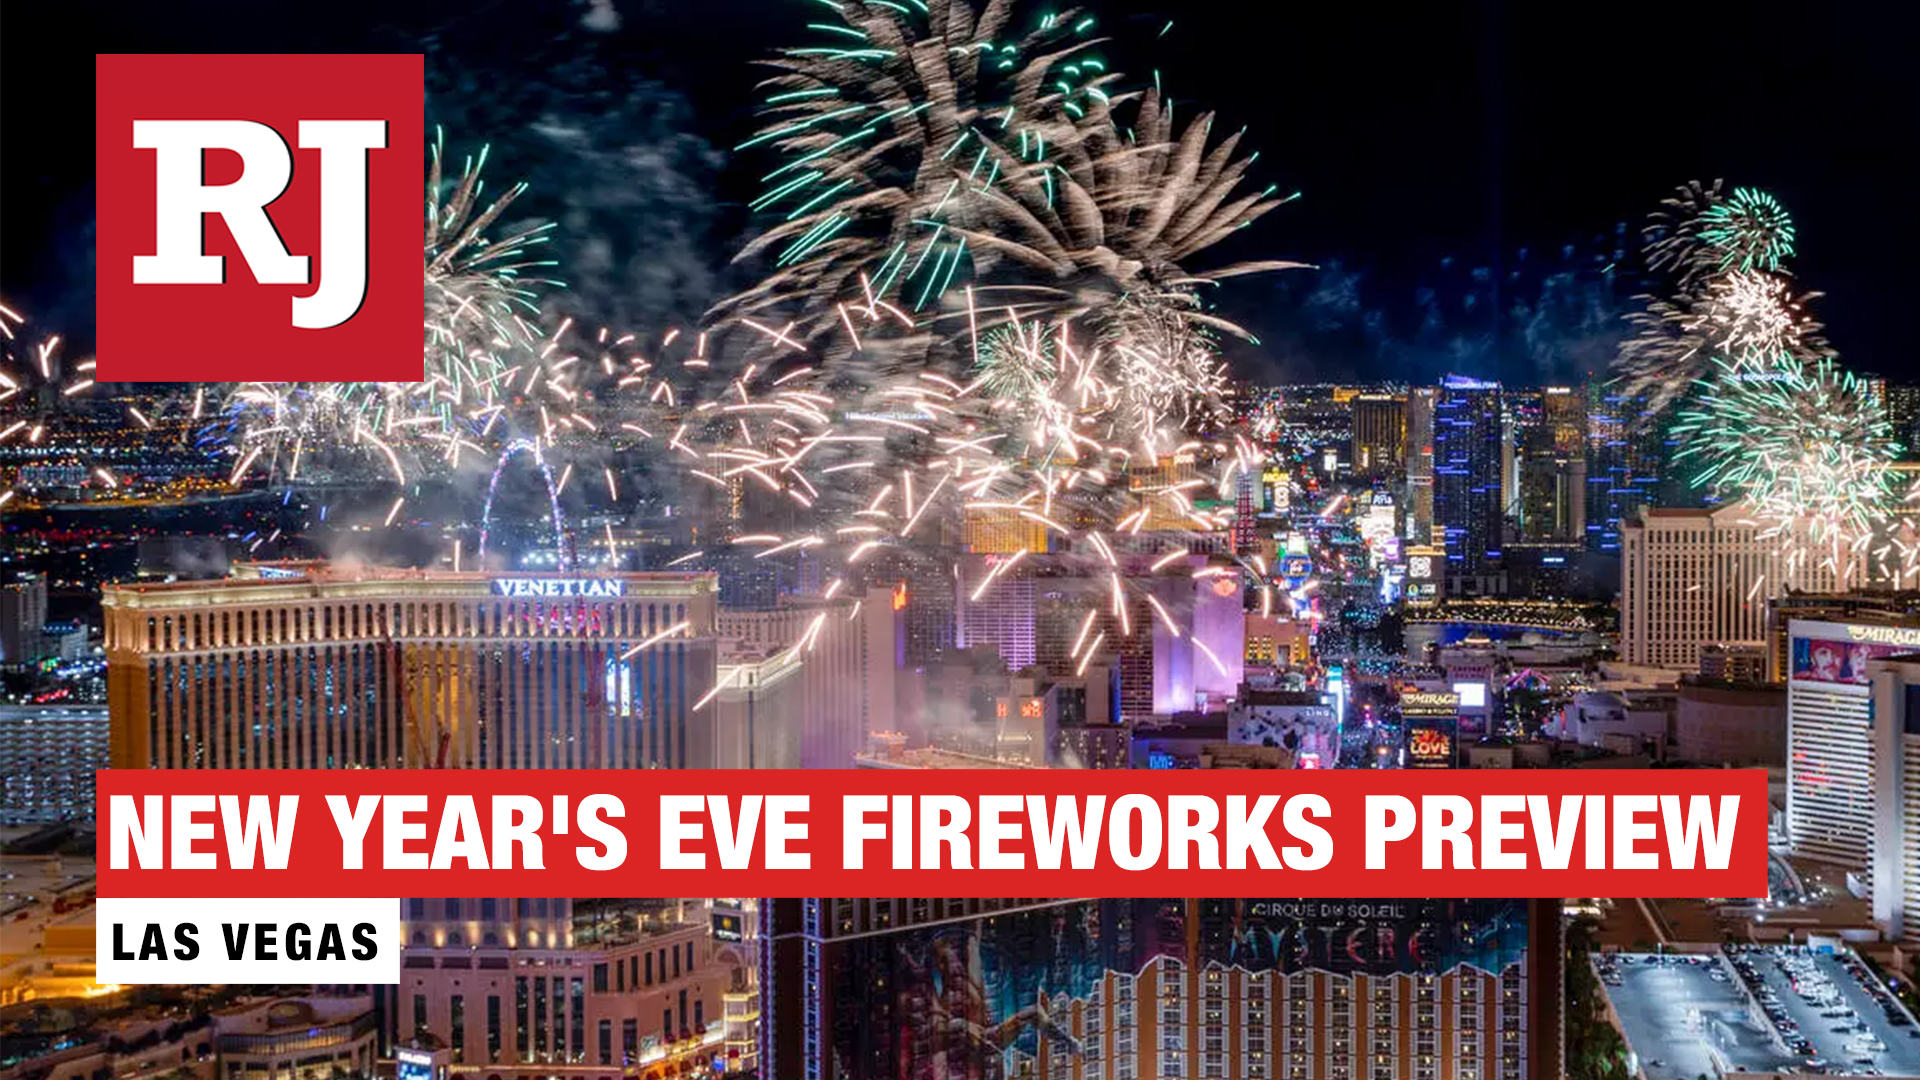 New Year’s Eve Fireworks Preview